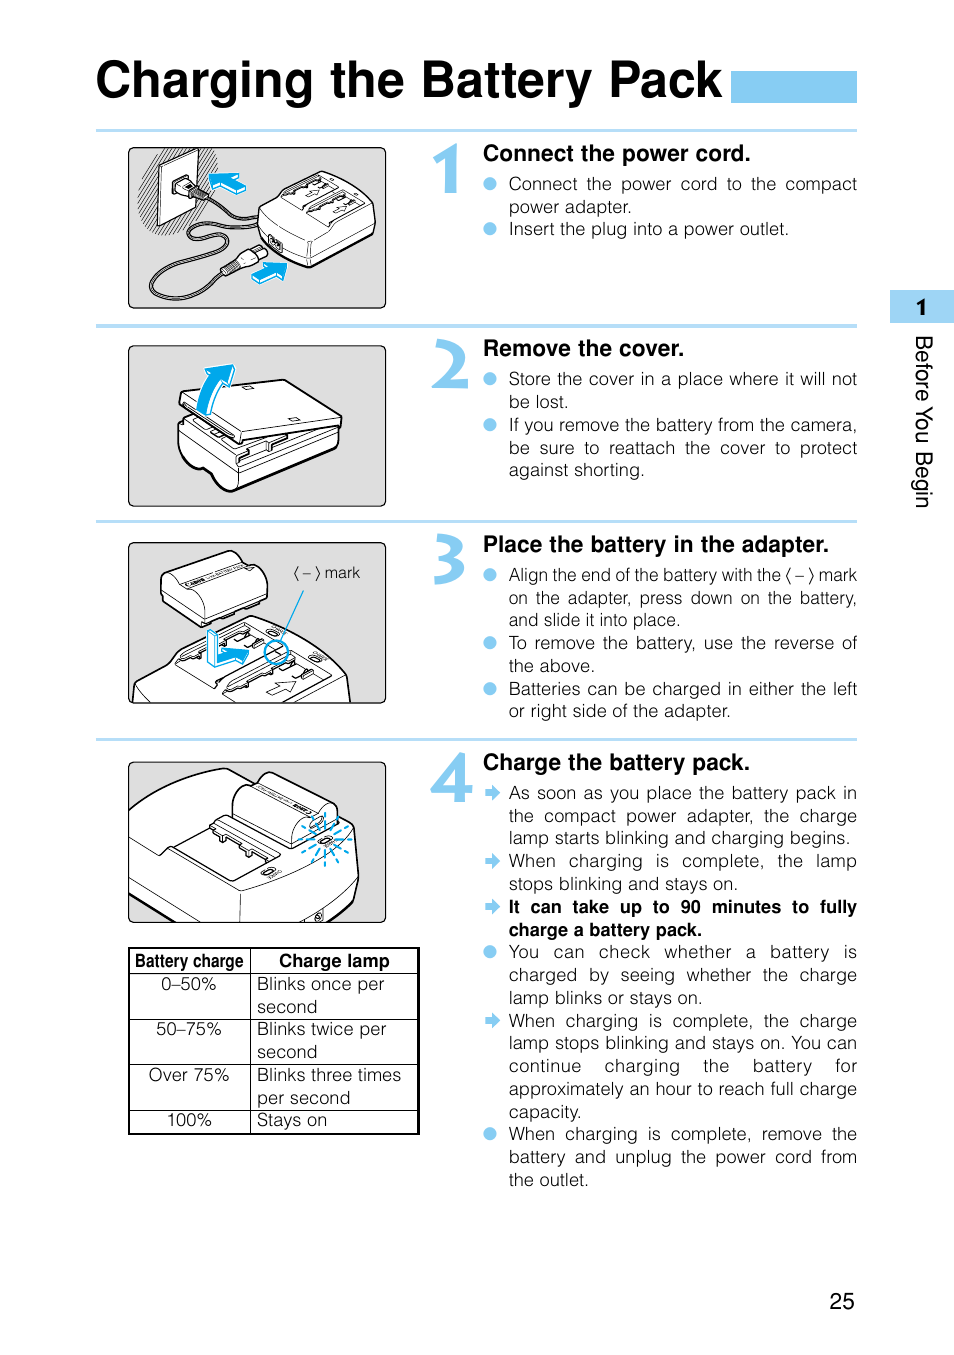 Charging the battery pack | Canon EOS D30 User Manual | Page 25 / 152